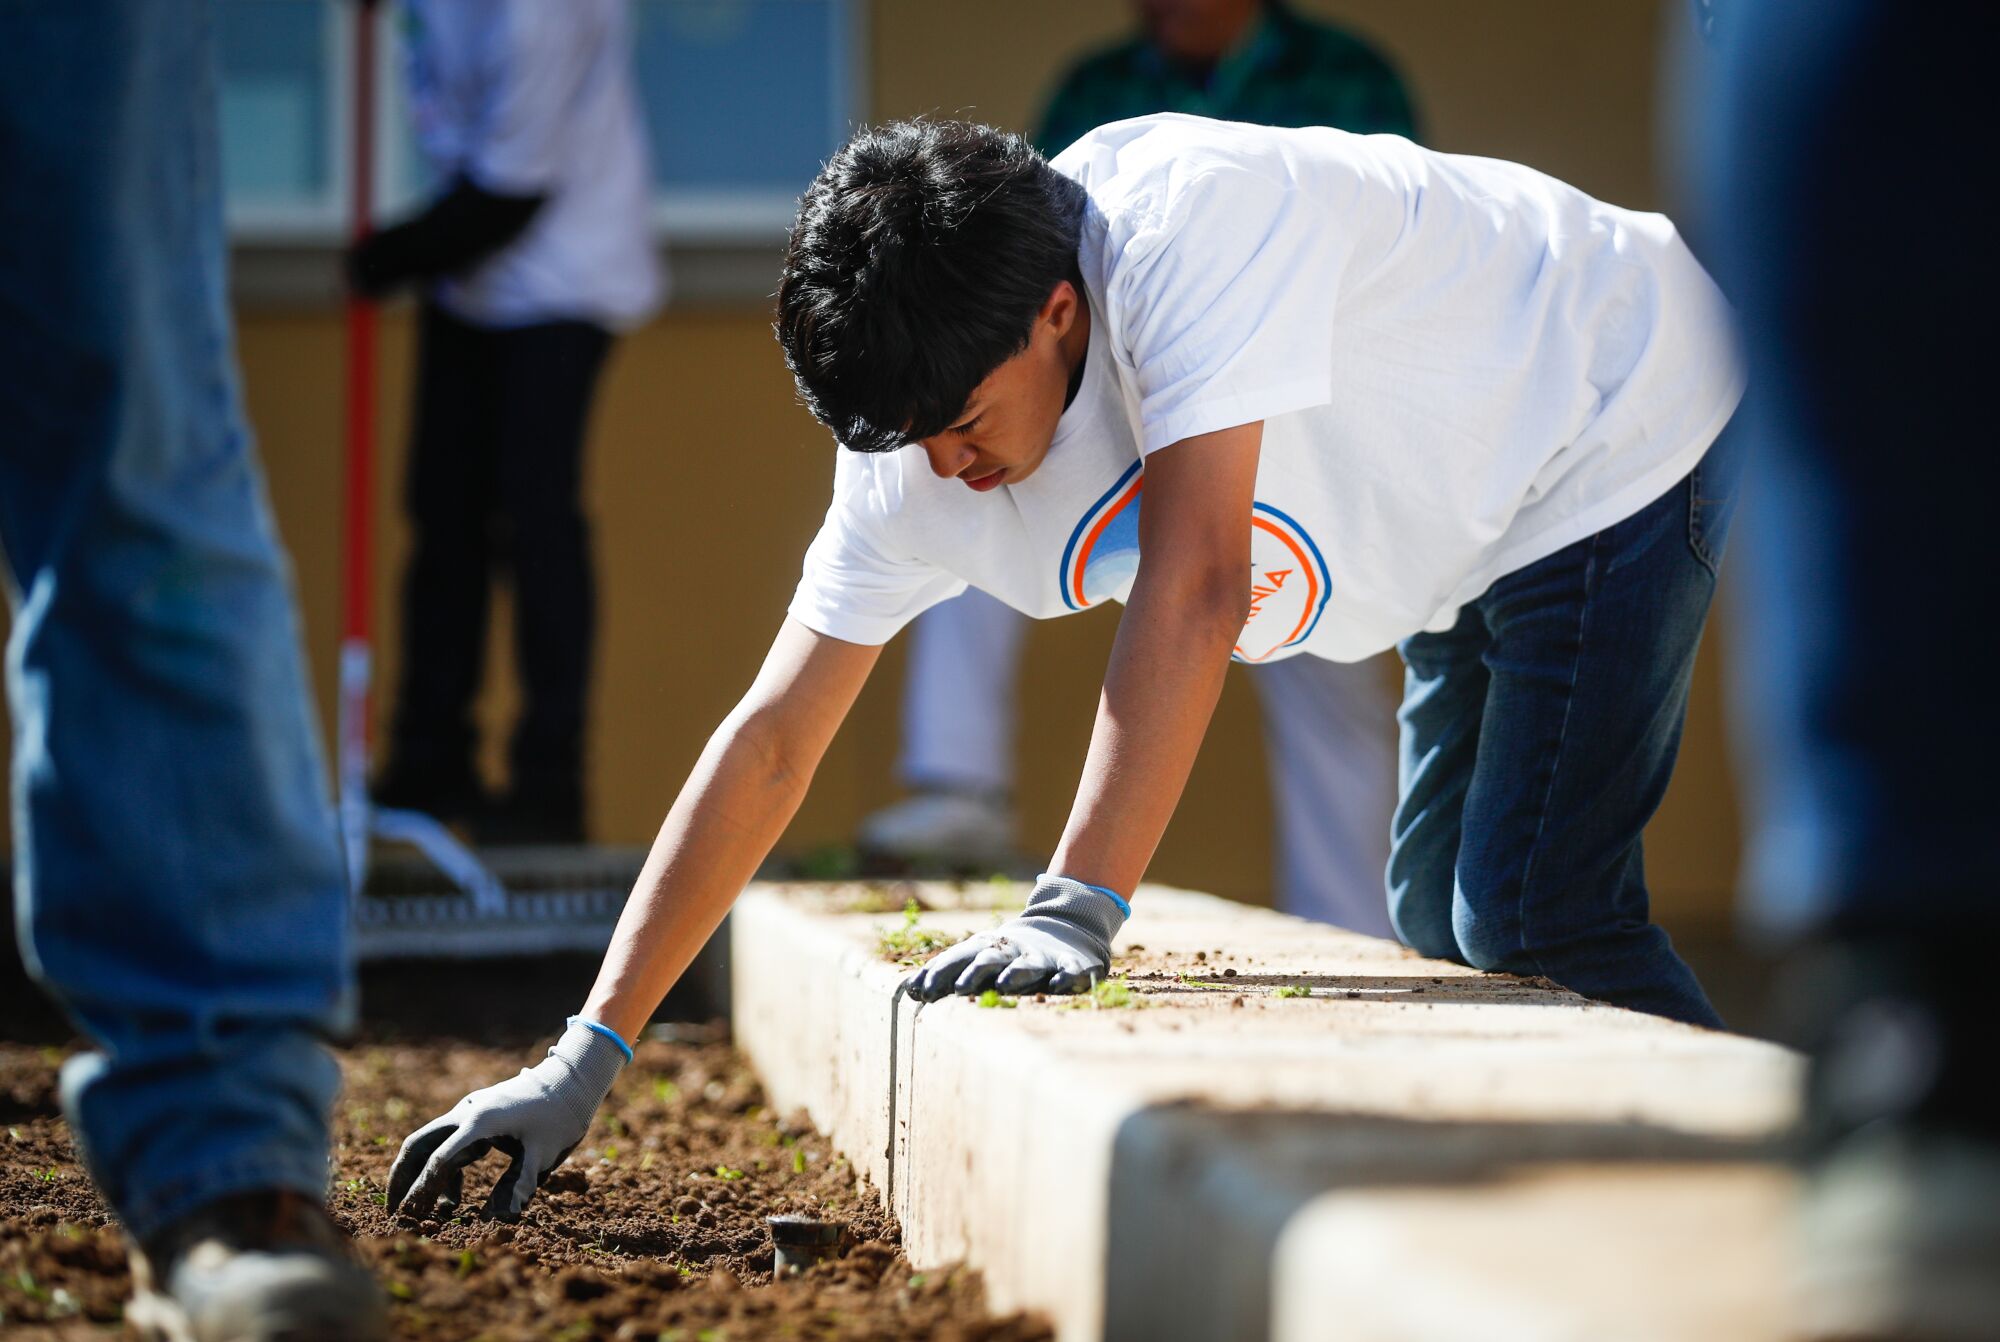 Southwest Middle School student Eder Murillo, 13, and classmates work to create a community garden